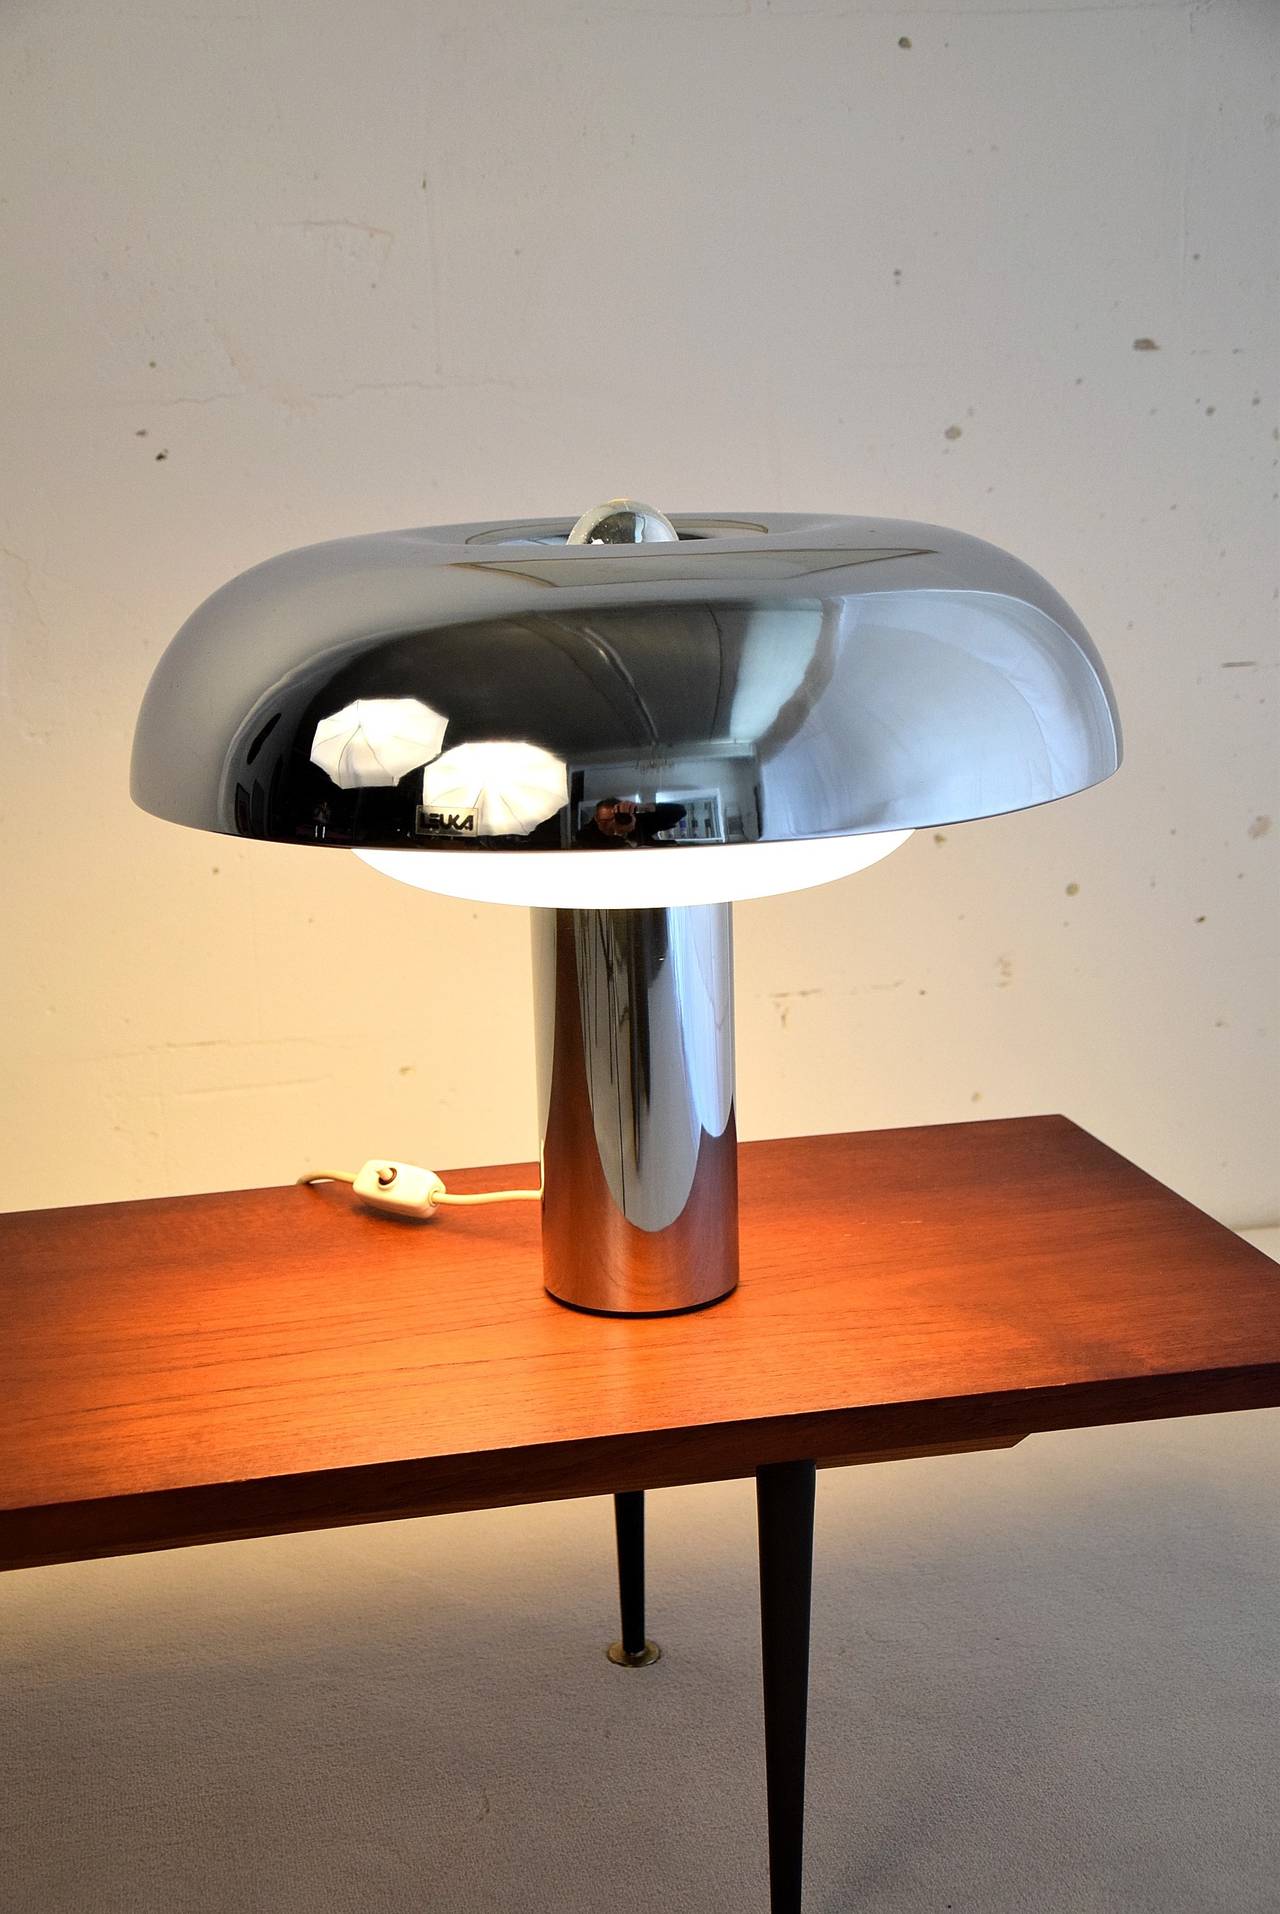 Late 20th Century 1970's Pampero table Lamp By Leuka